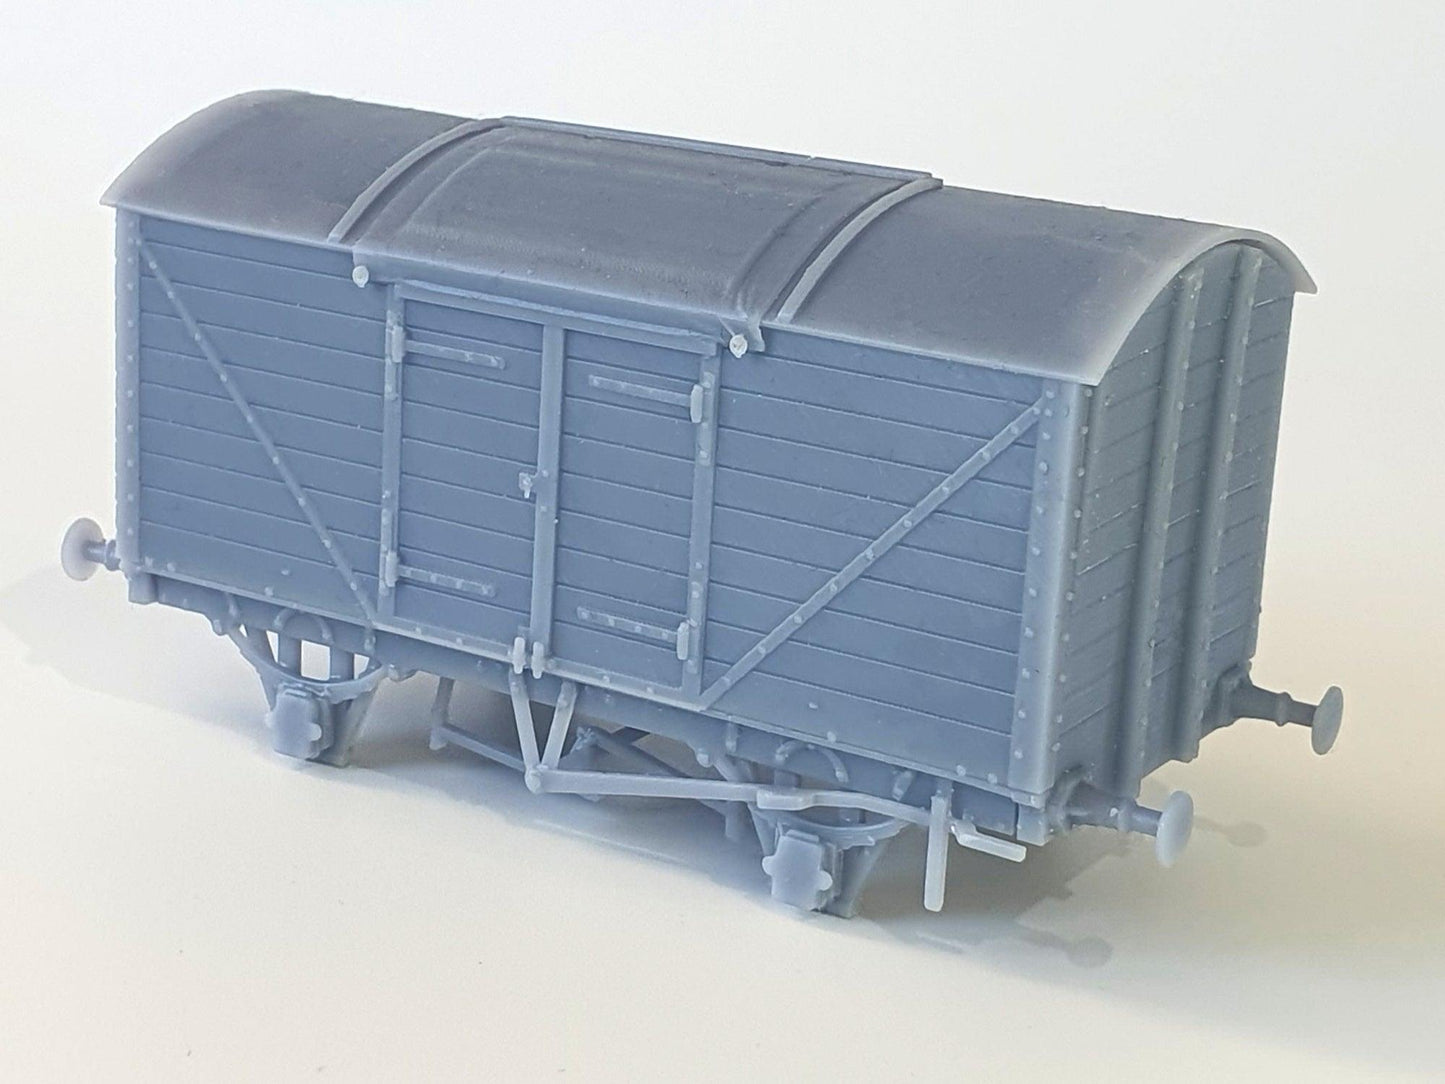 OO (1:76) scale model of an L&Y Diagram 3 Covered Goods wagon - Three Peaks Models